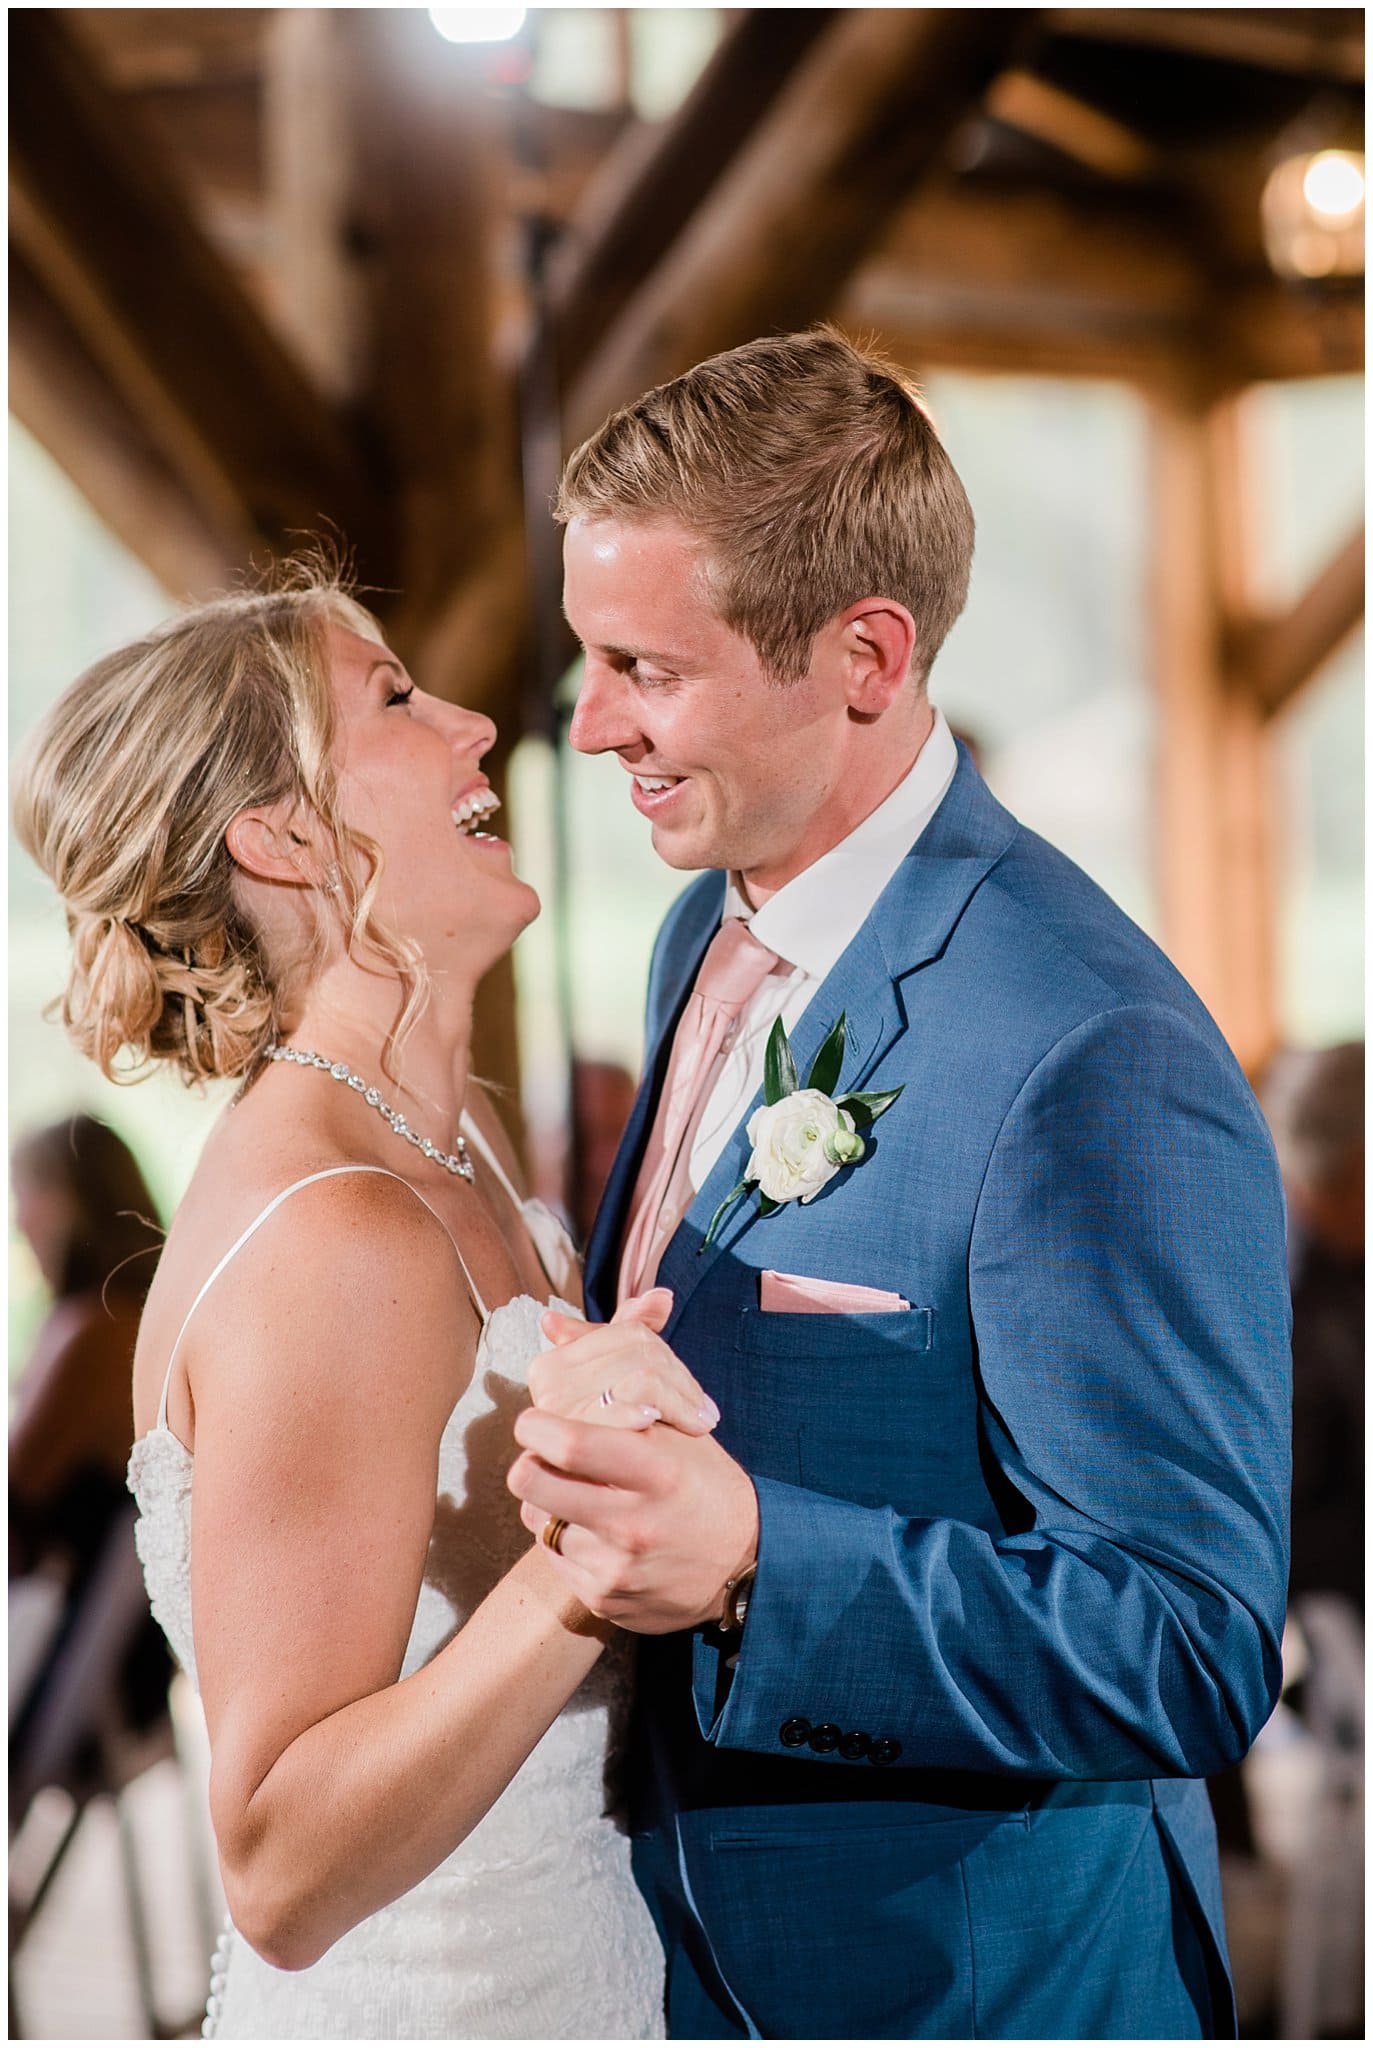 at Piney River Ranch Summer Wedding by Vail wedding photographer Jennie Crate Photographer